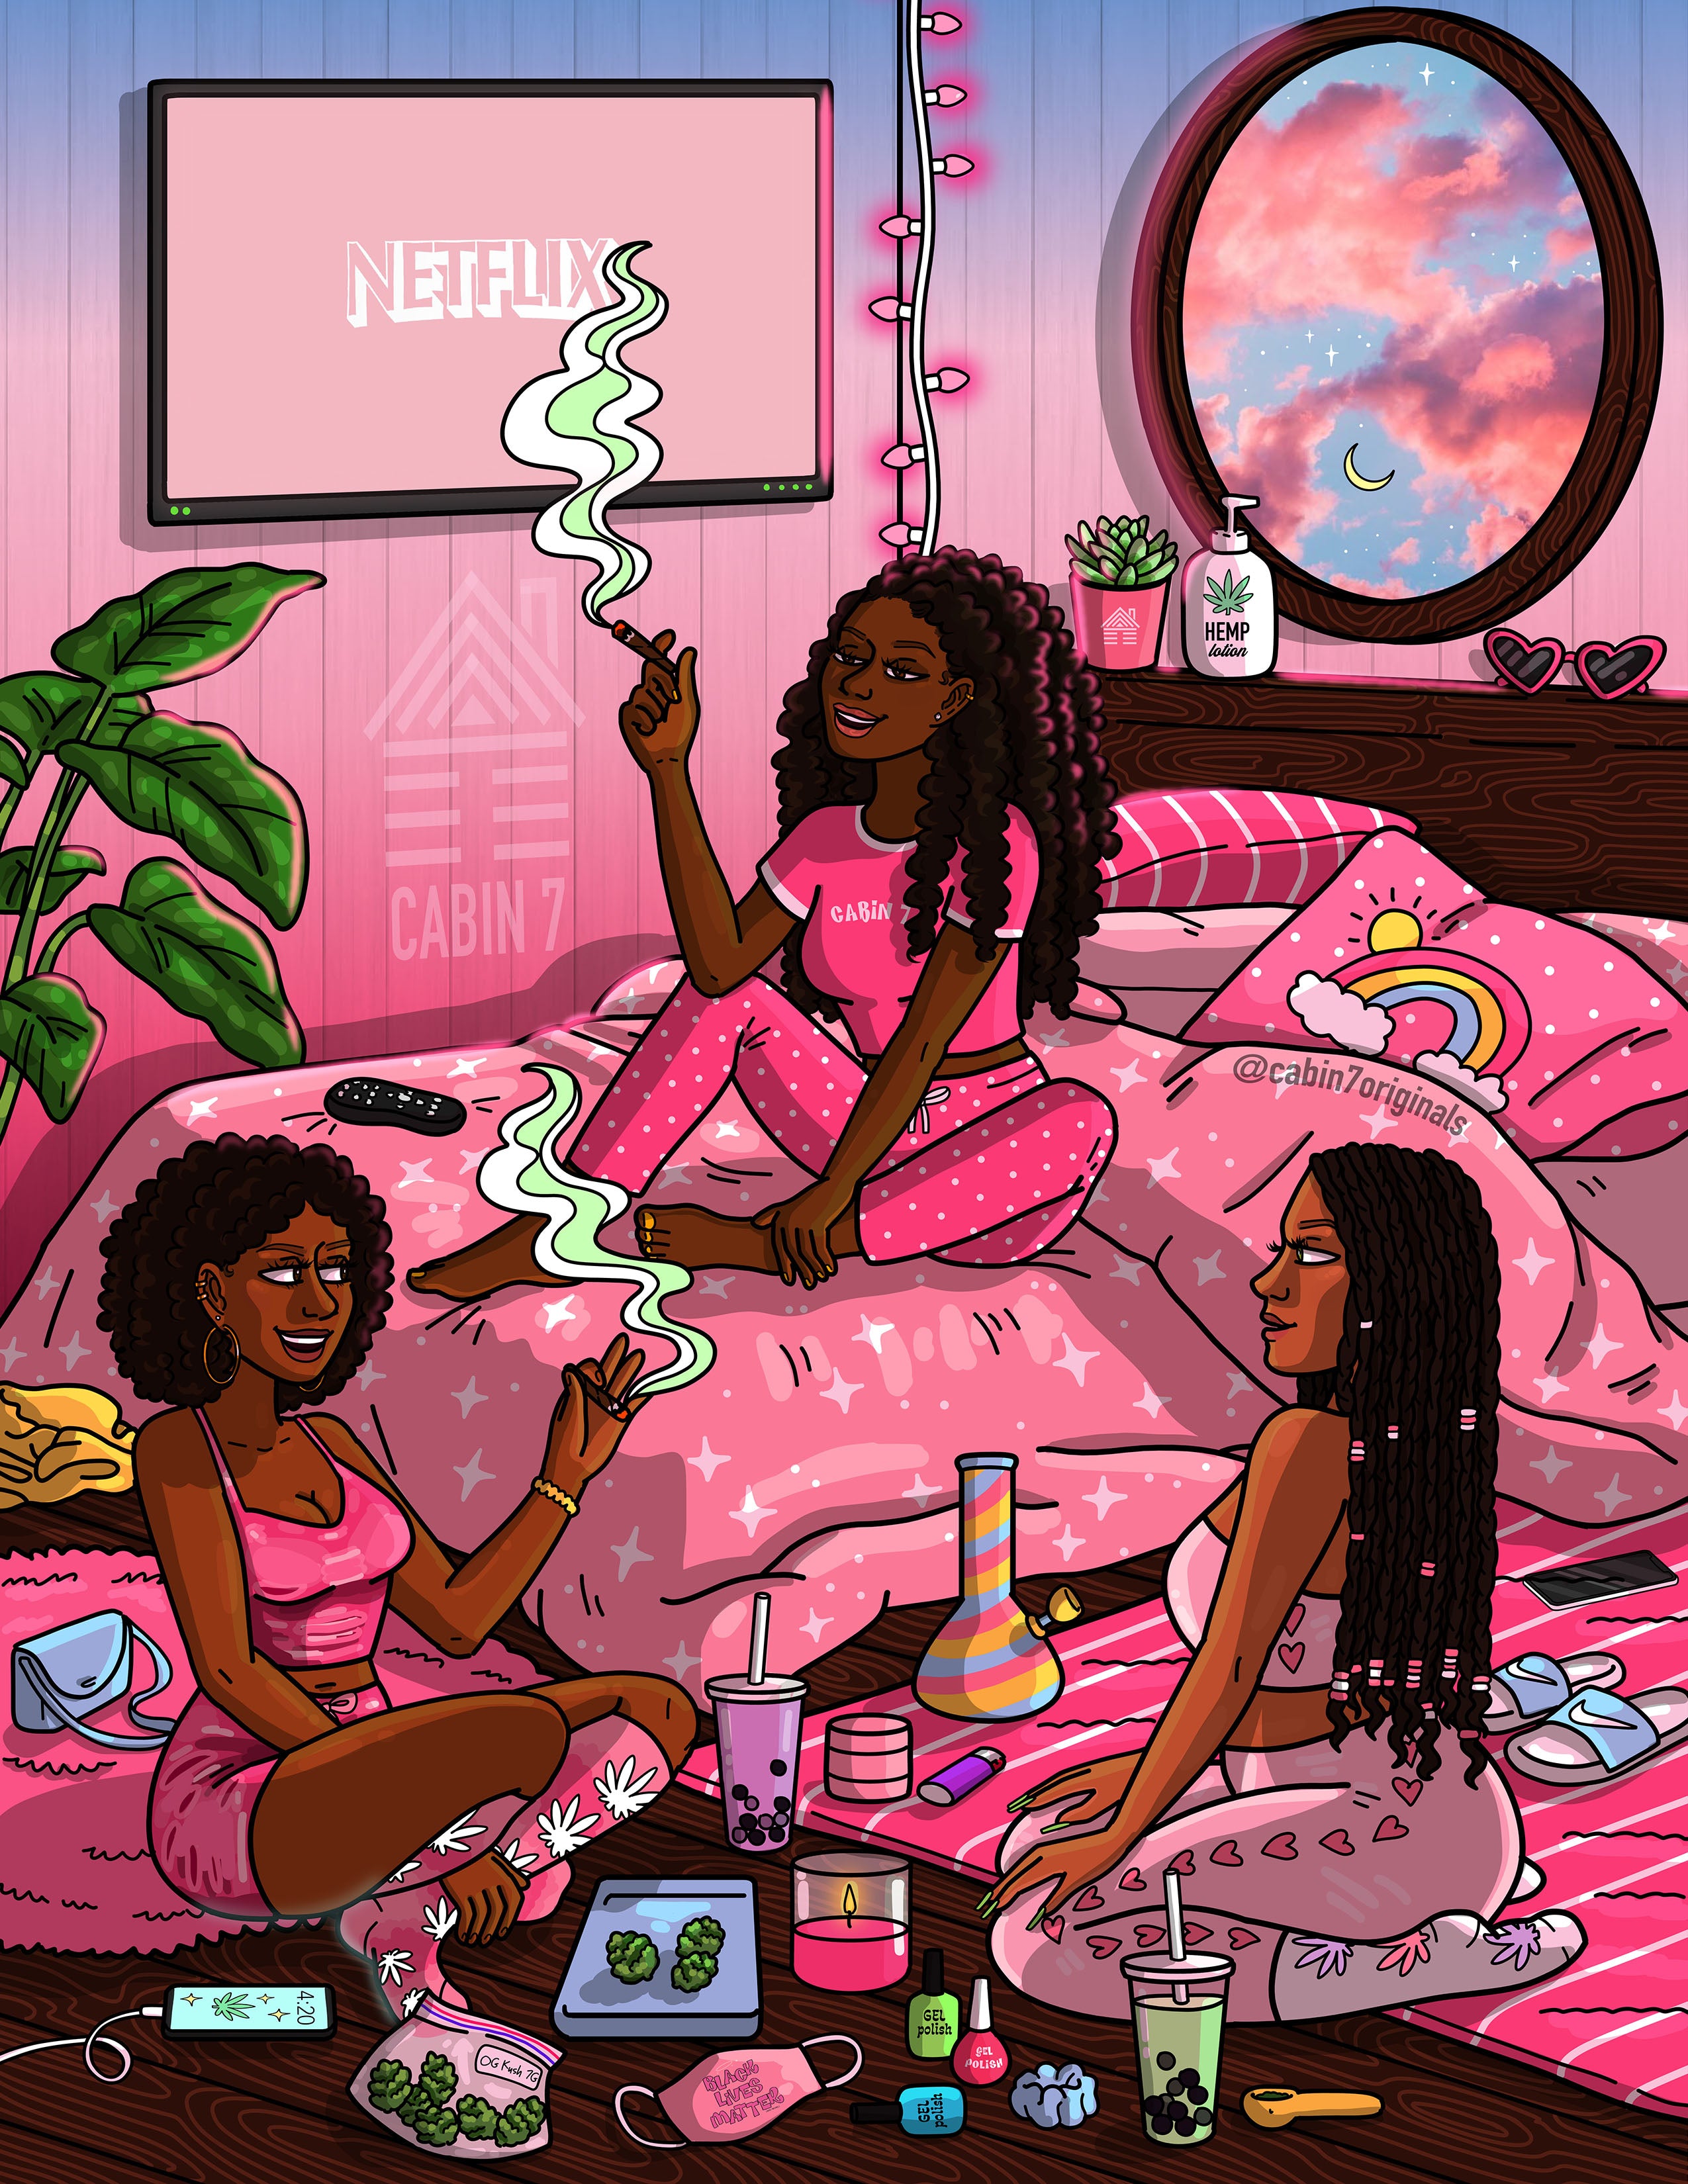 "Strawberry Candy" Poster Print